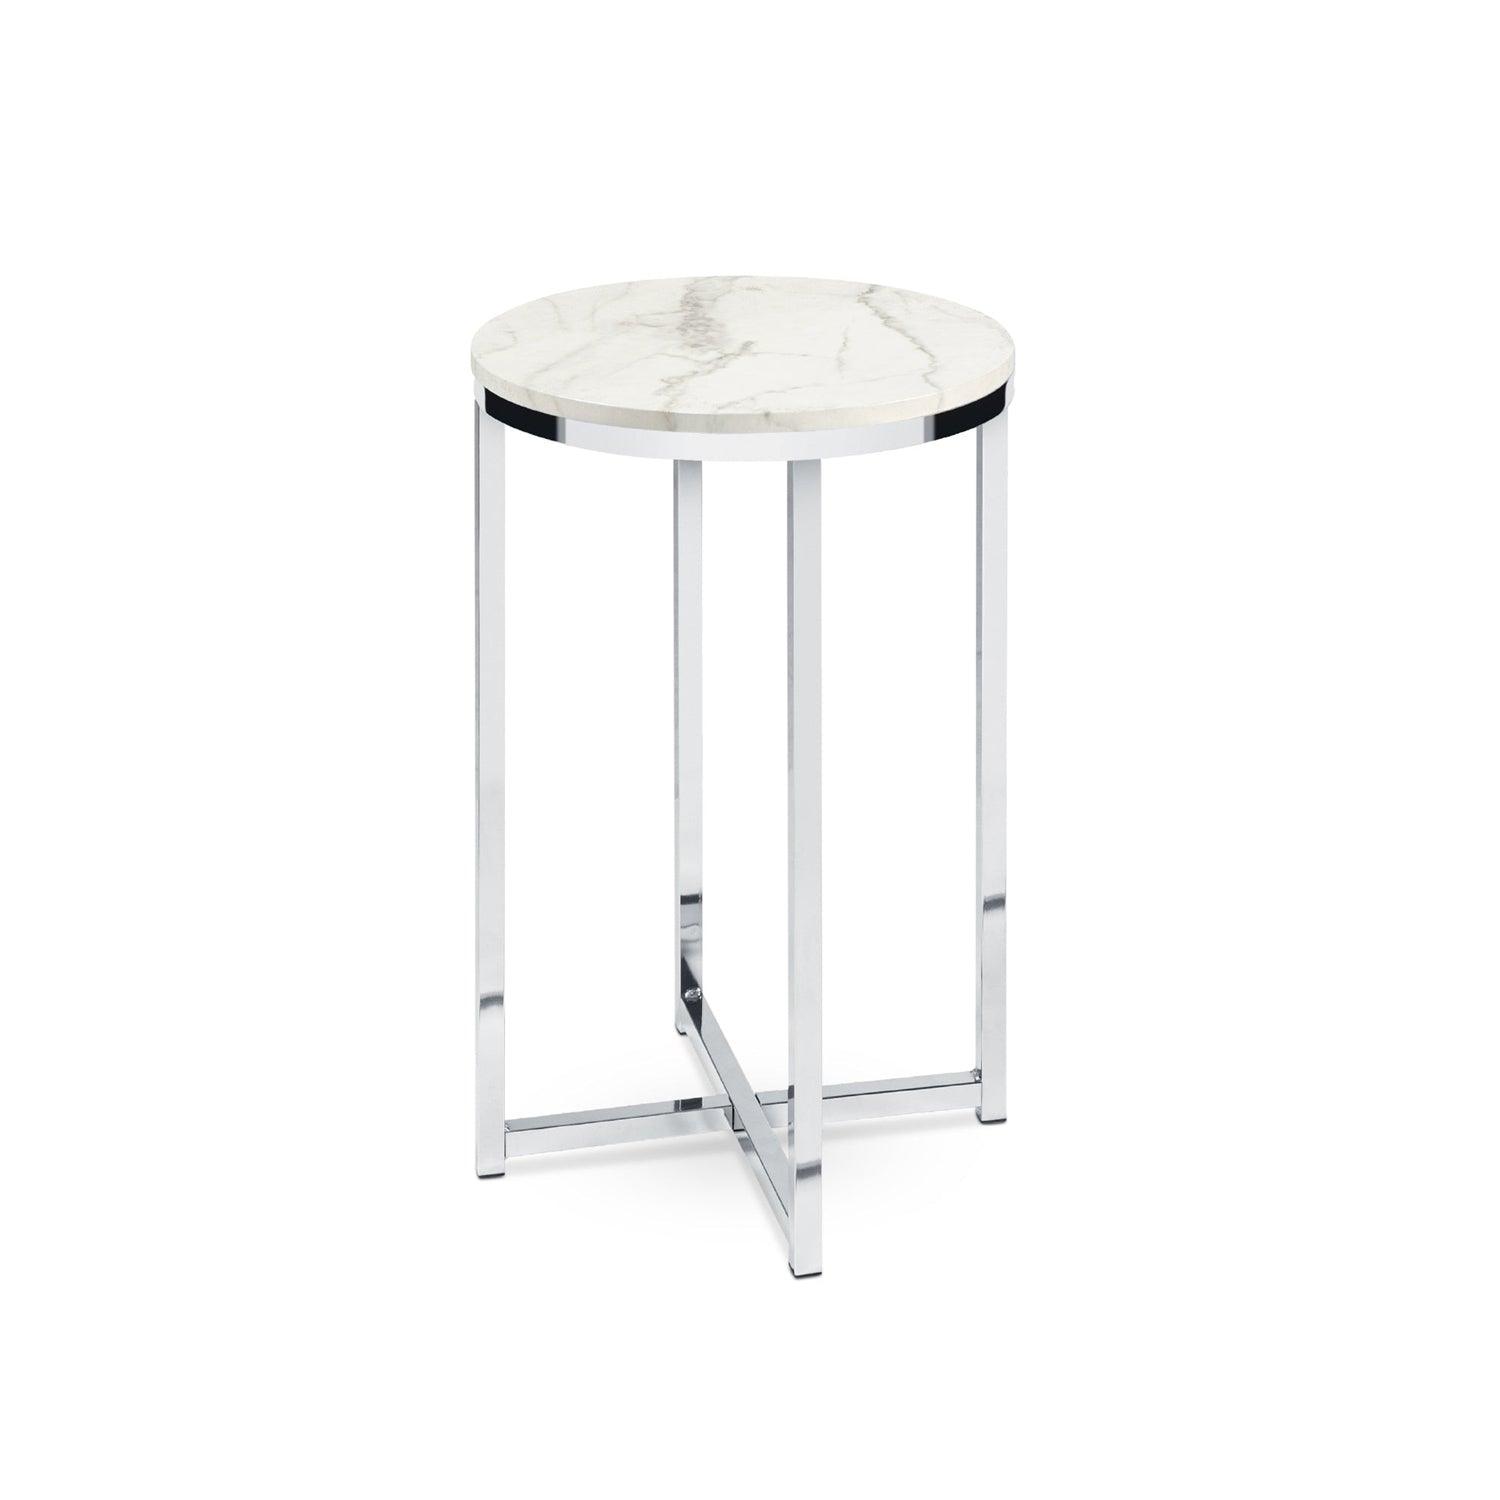 Round Cross Leg Design Coffee Side Table Nightstand with Faux Marble Top White/Chrome - AFS